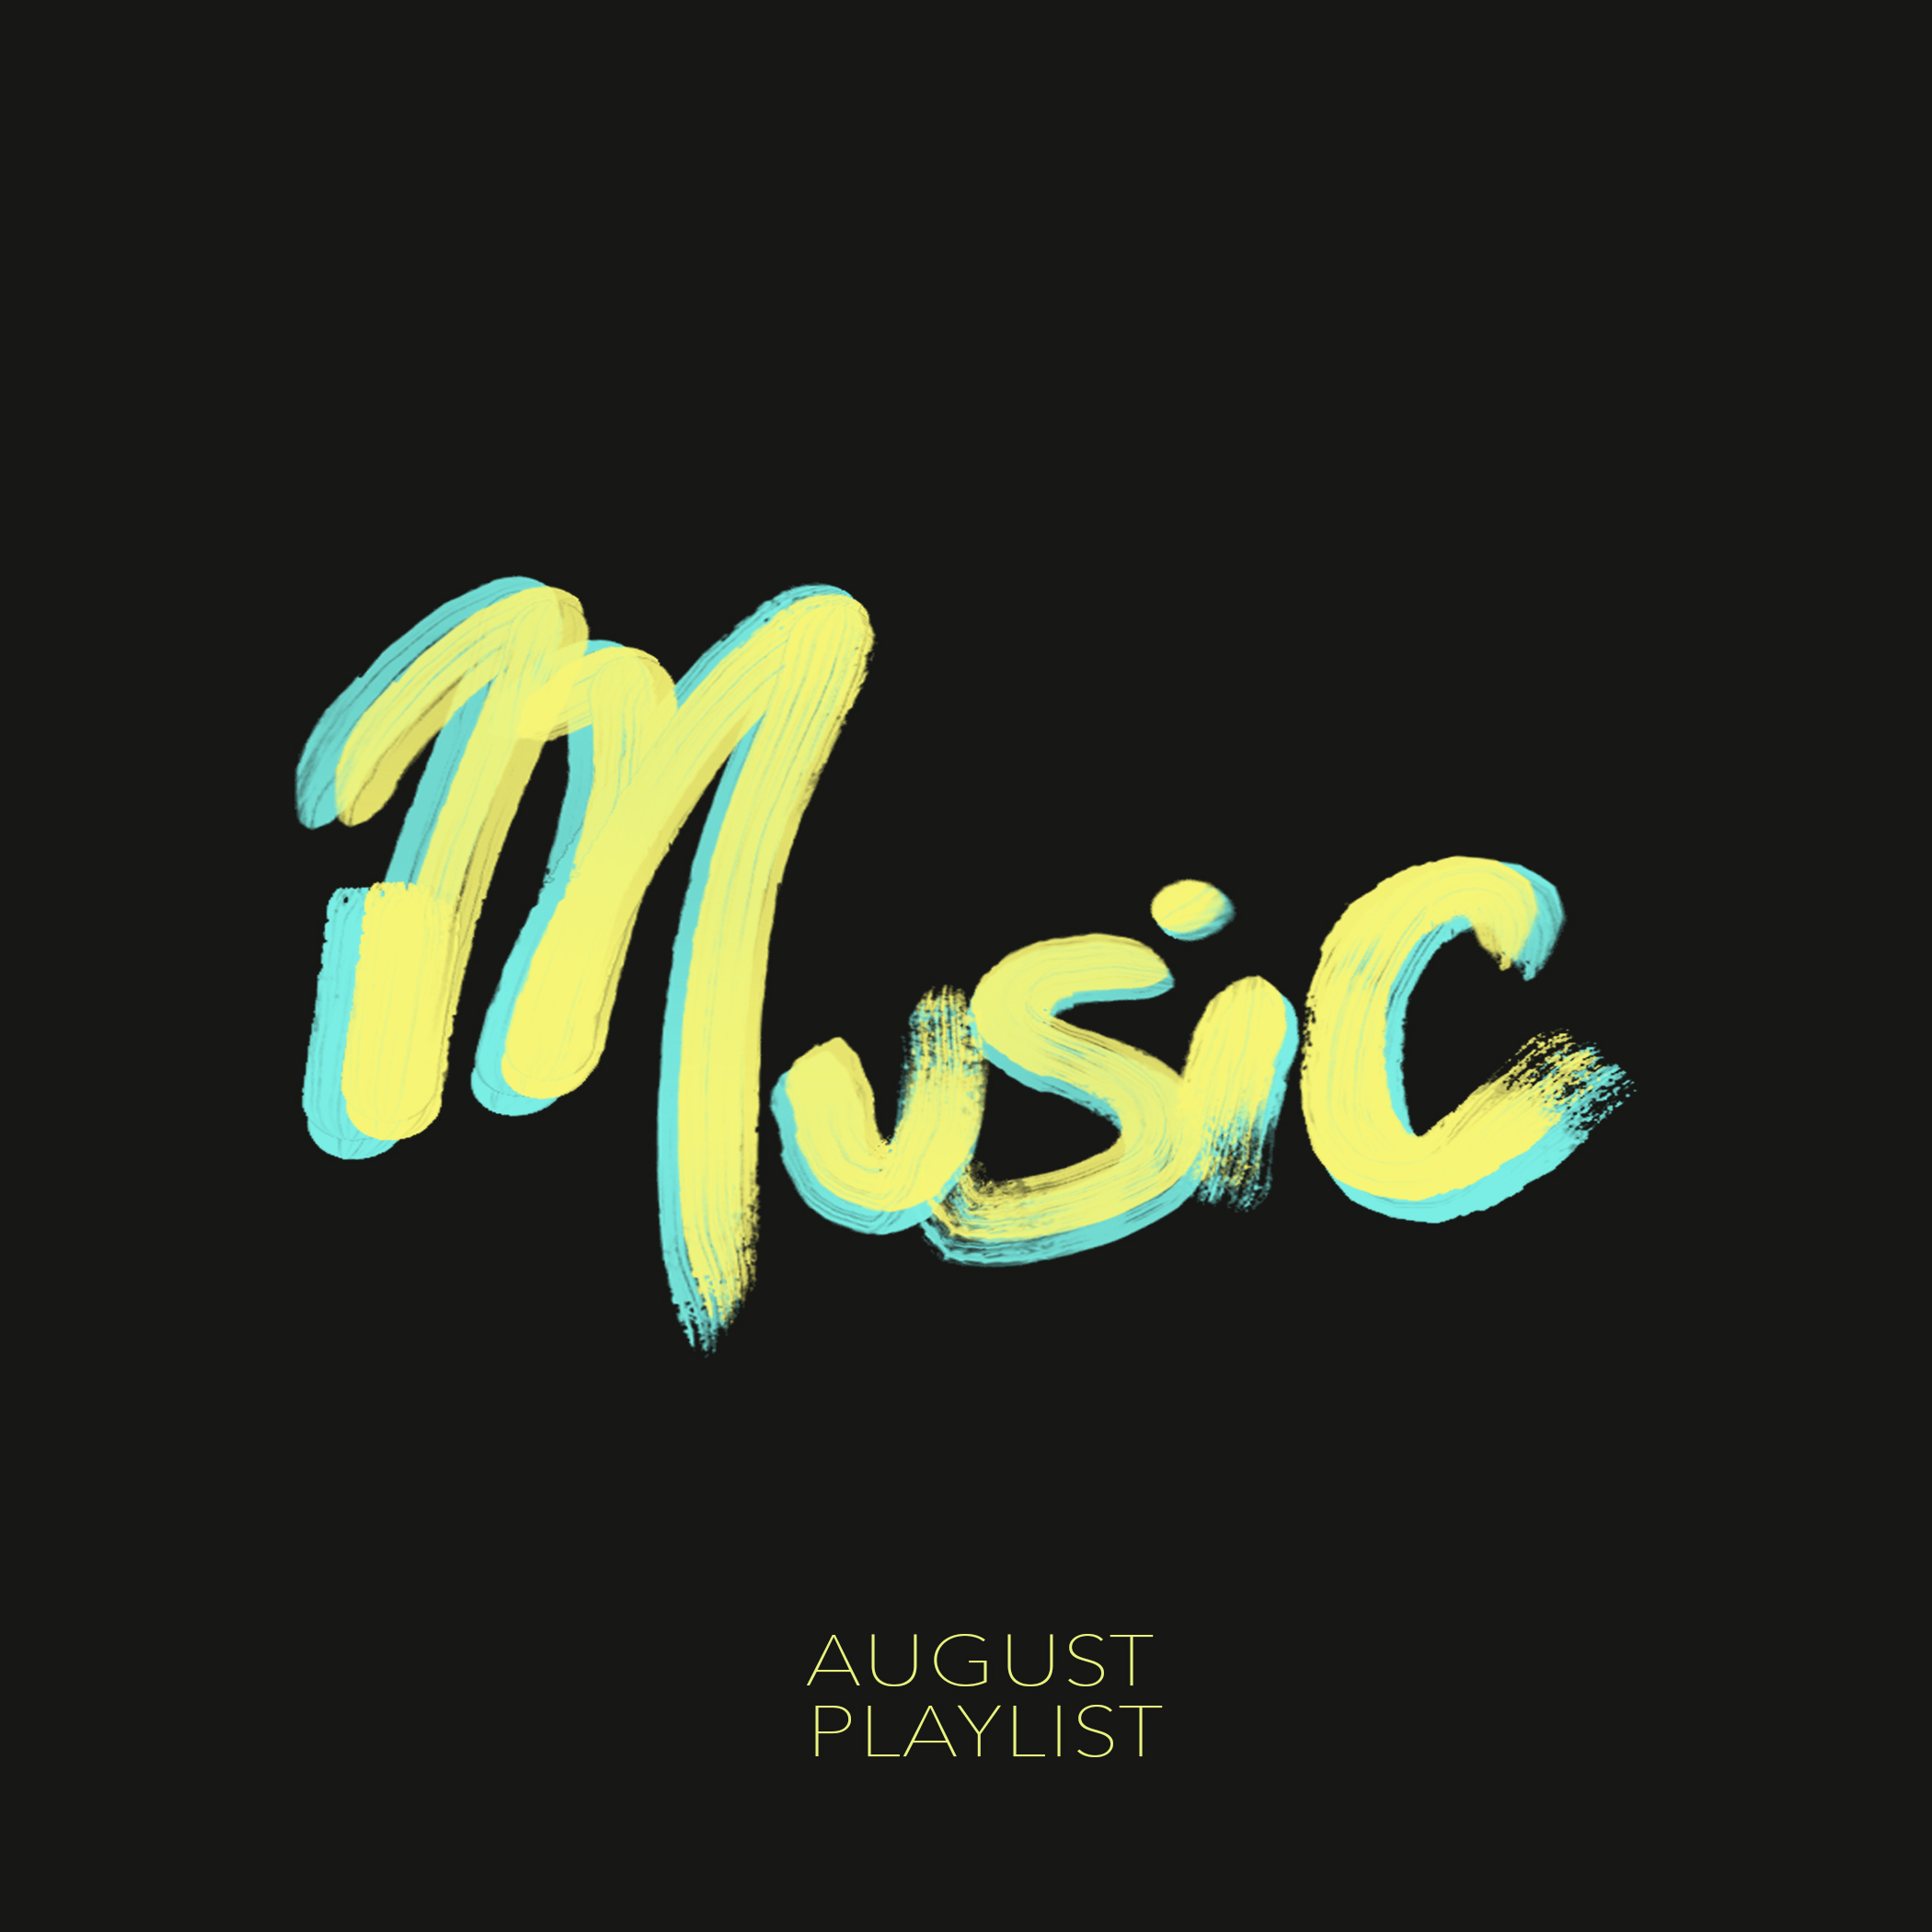 August Playlist: Get Ready to Turn up